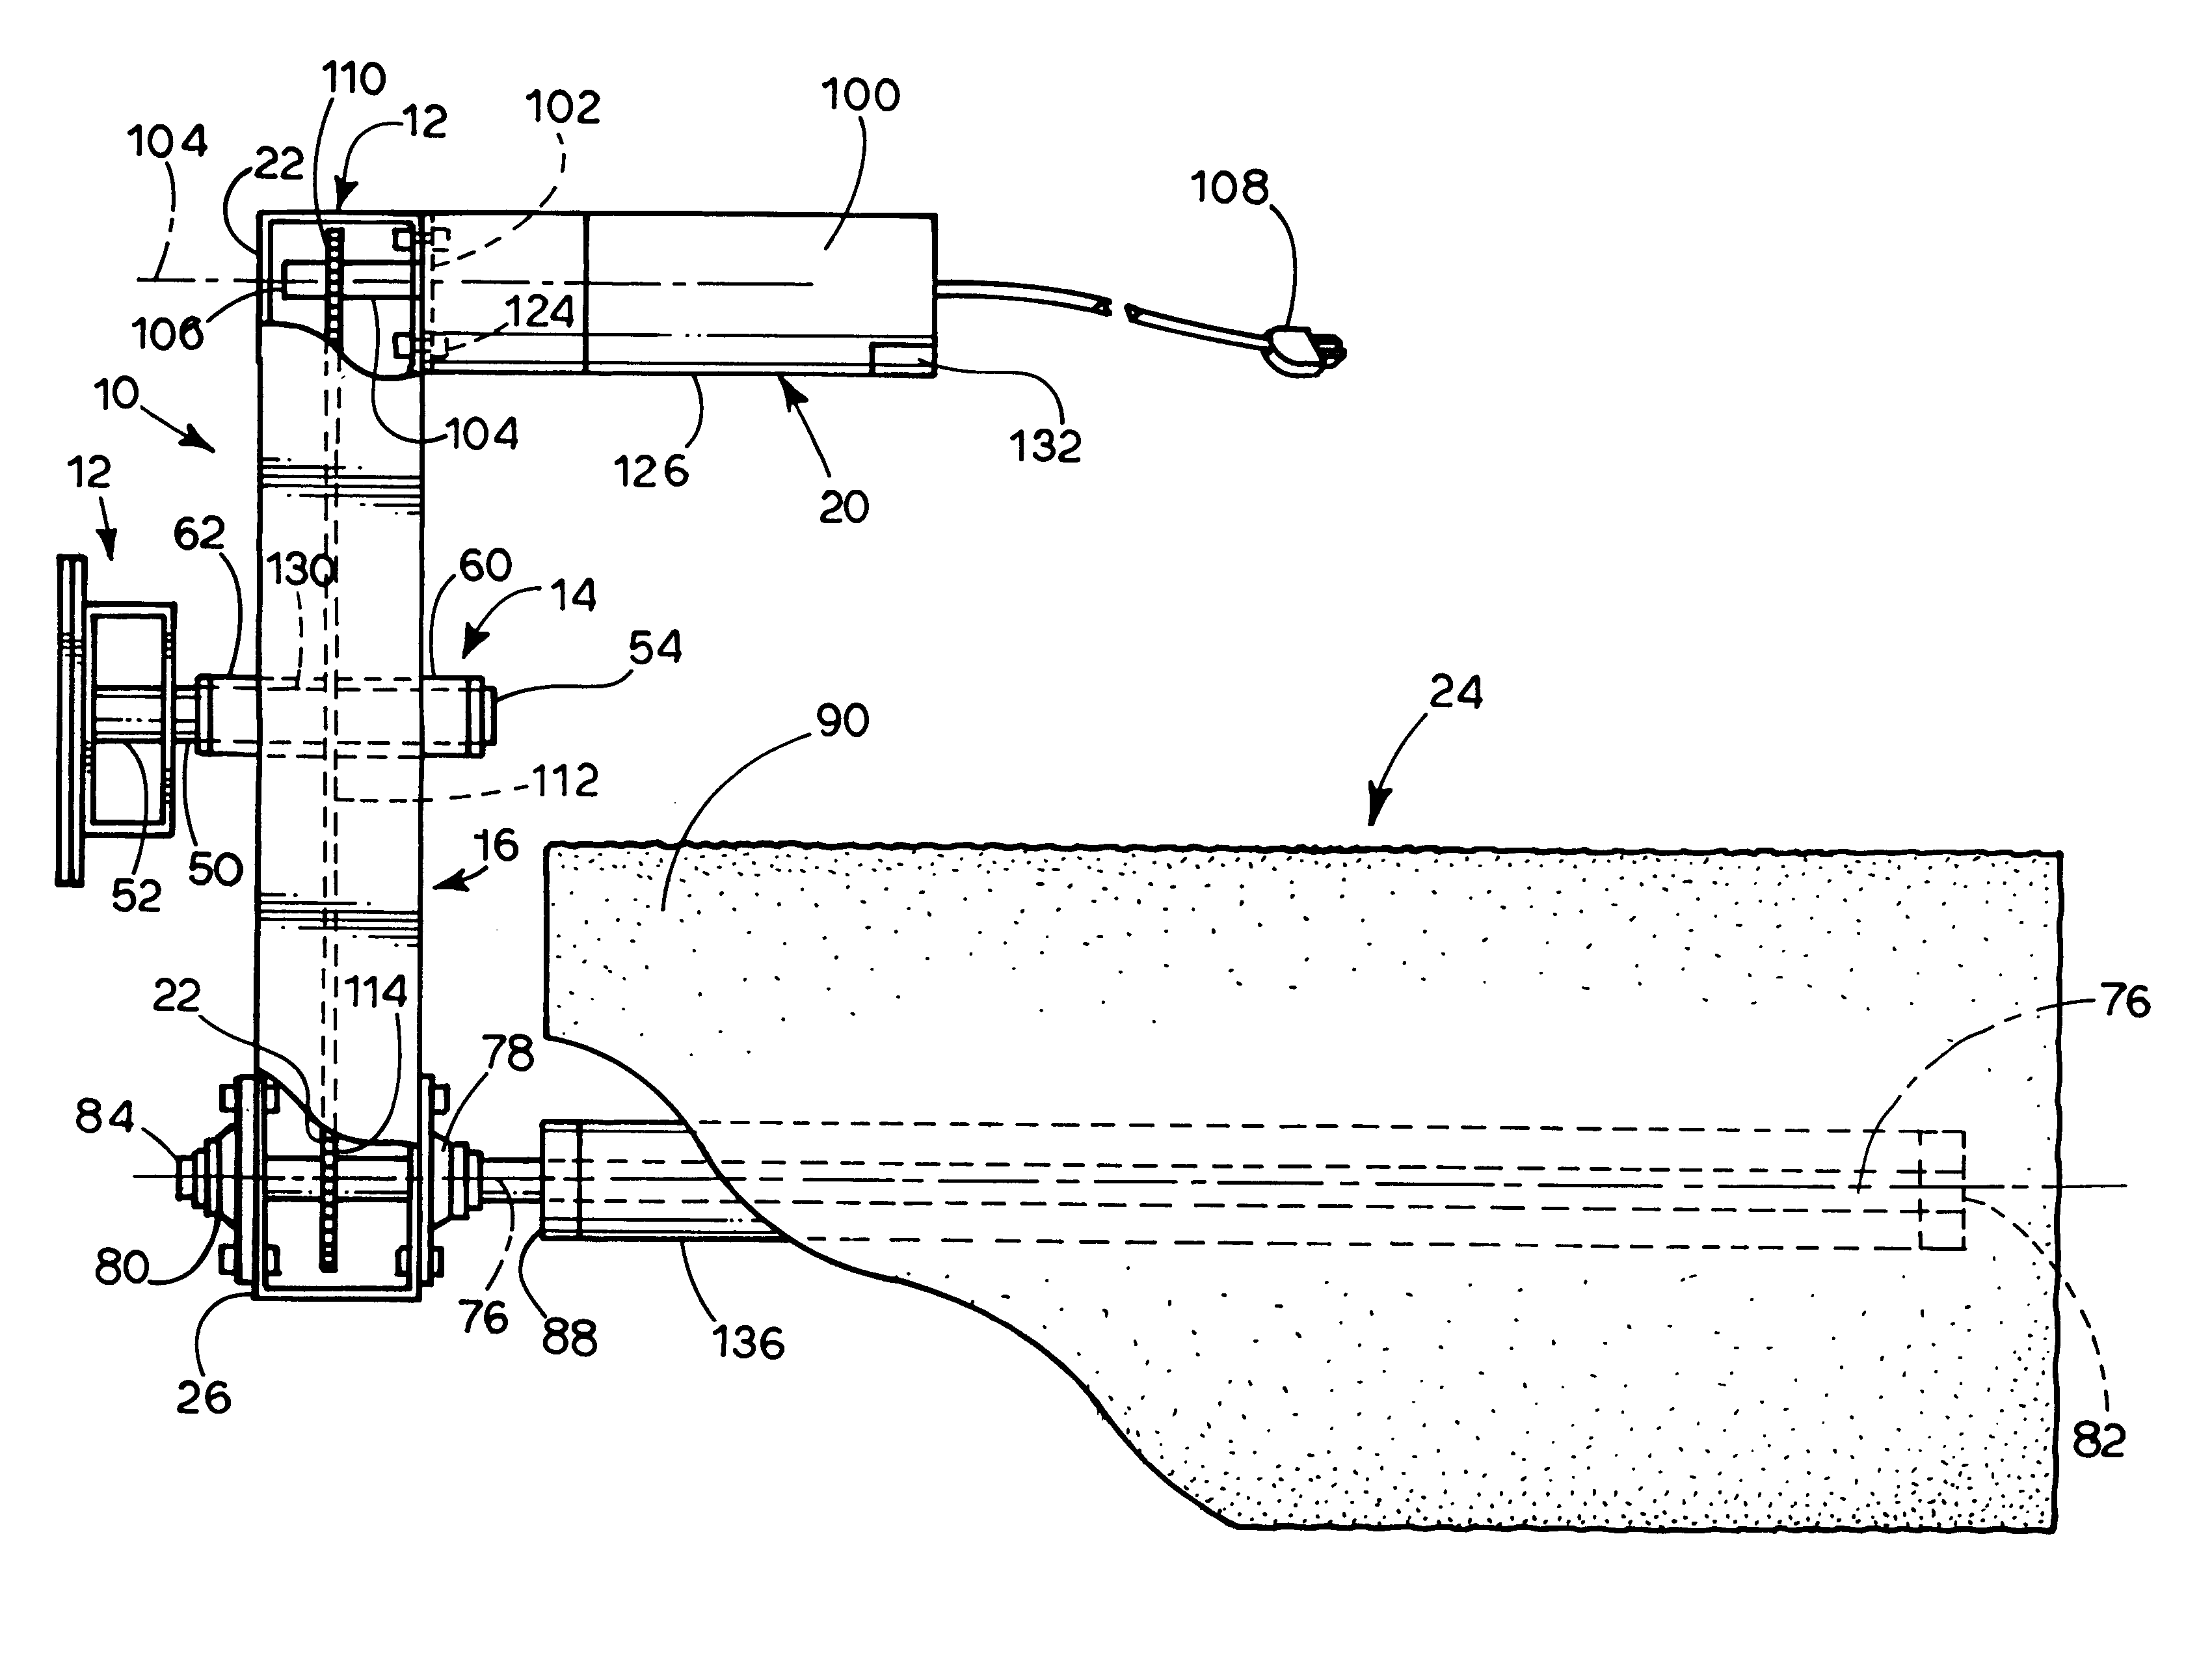 Automatic, on-demand, self-adjusting brushing system for use with large animals, such as cows